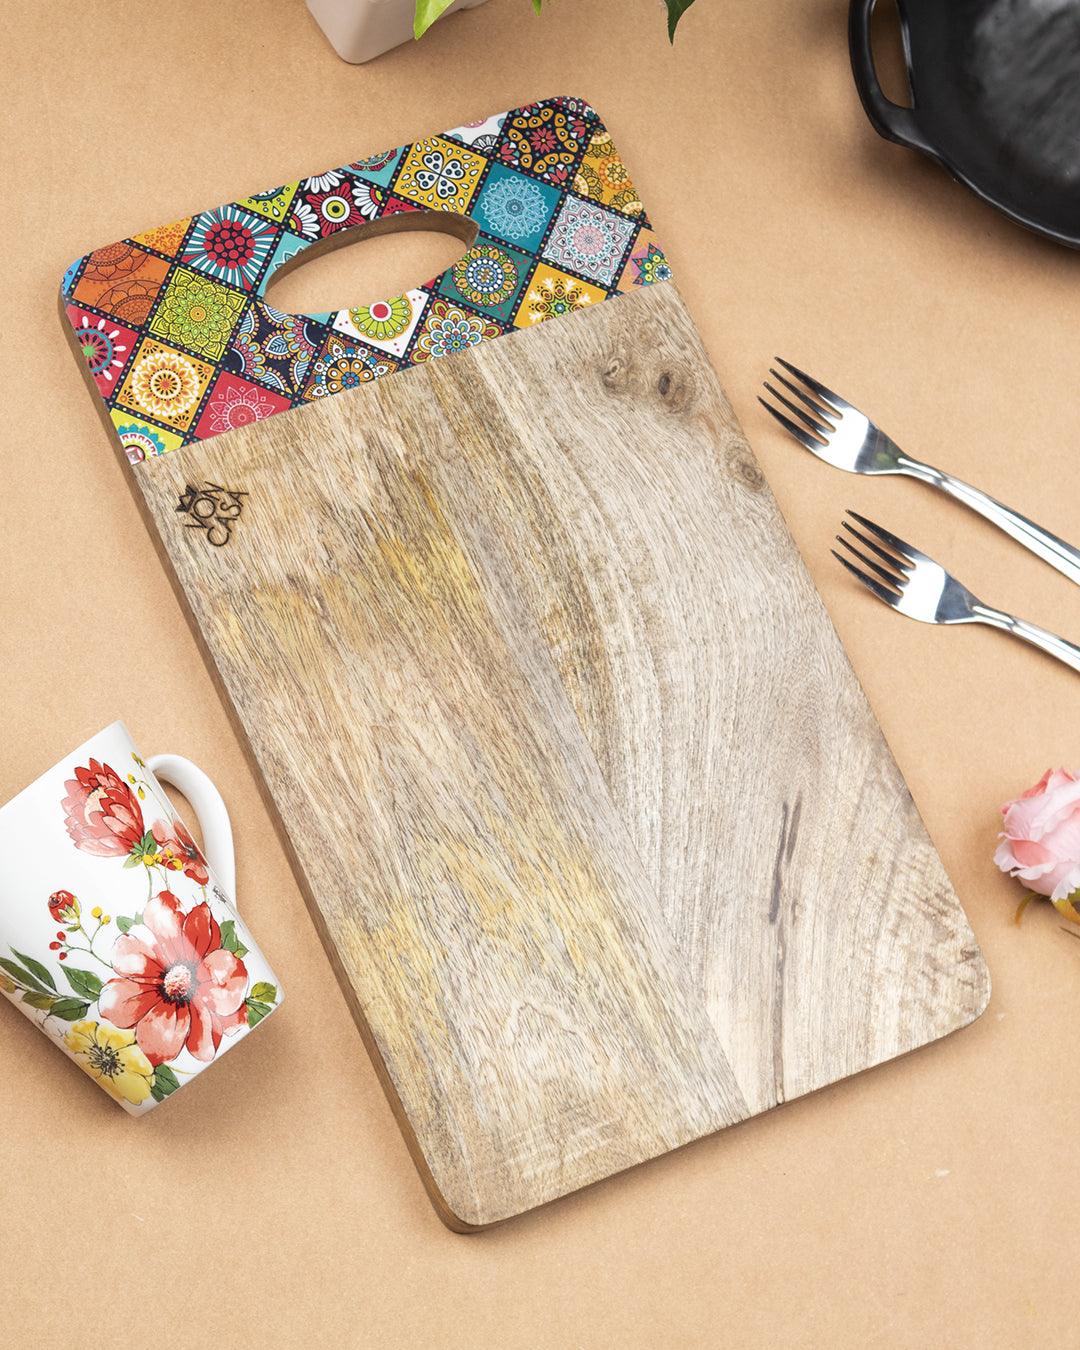 Market99 Wooden Kitchen Cutting & Chopping Board With Printed Handle - MARKET 99